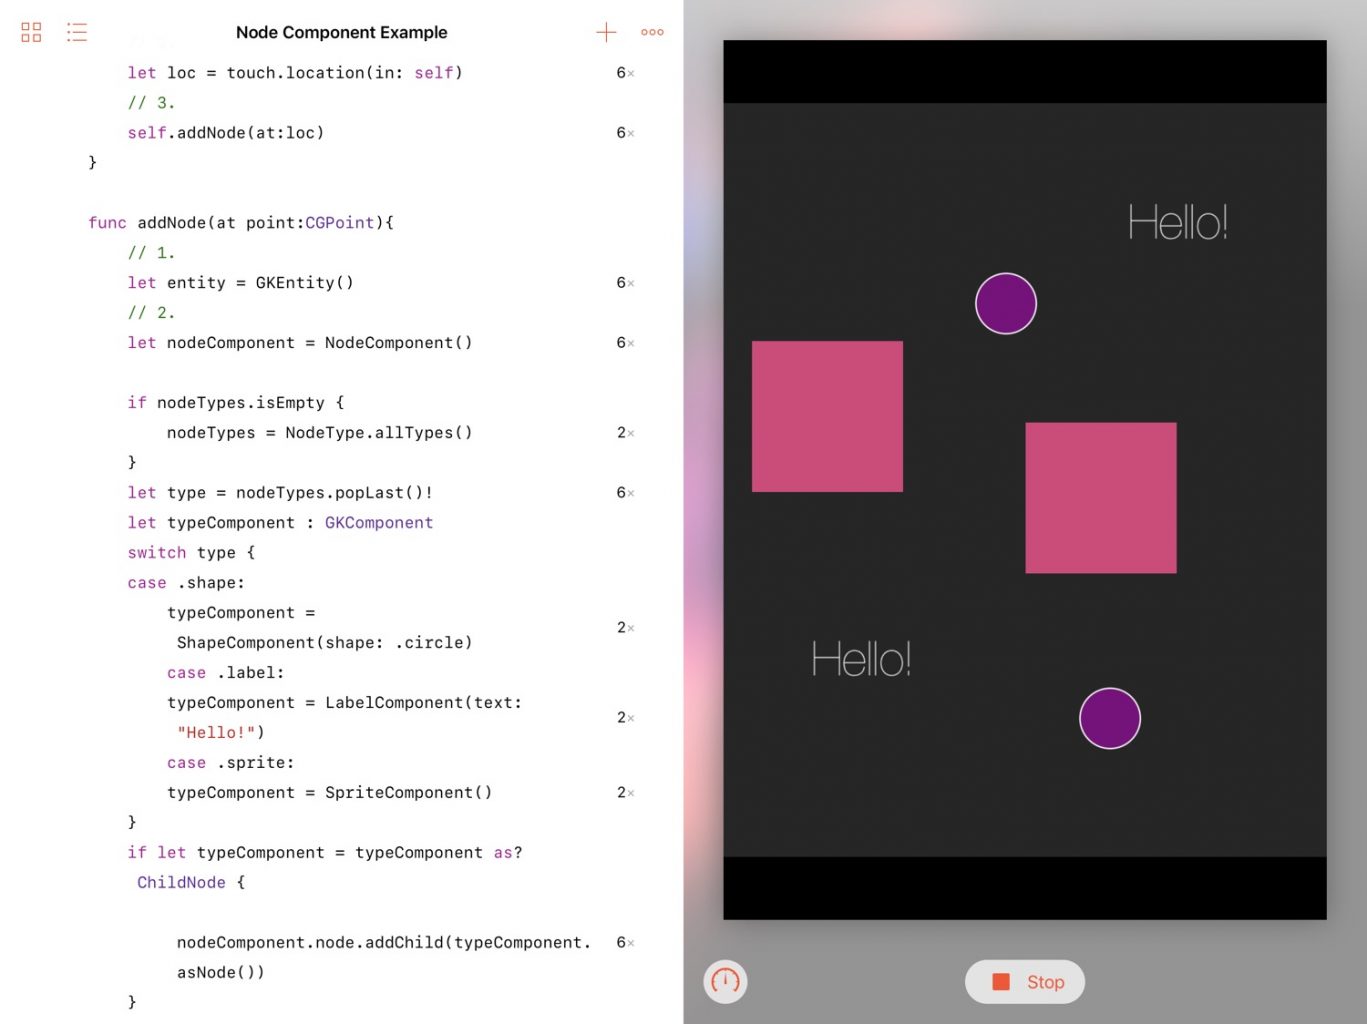 A screenshot of a Swift Playground showing code on the left and a grey field on the right filled with circles, squares, and text labels that say "Hello!"